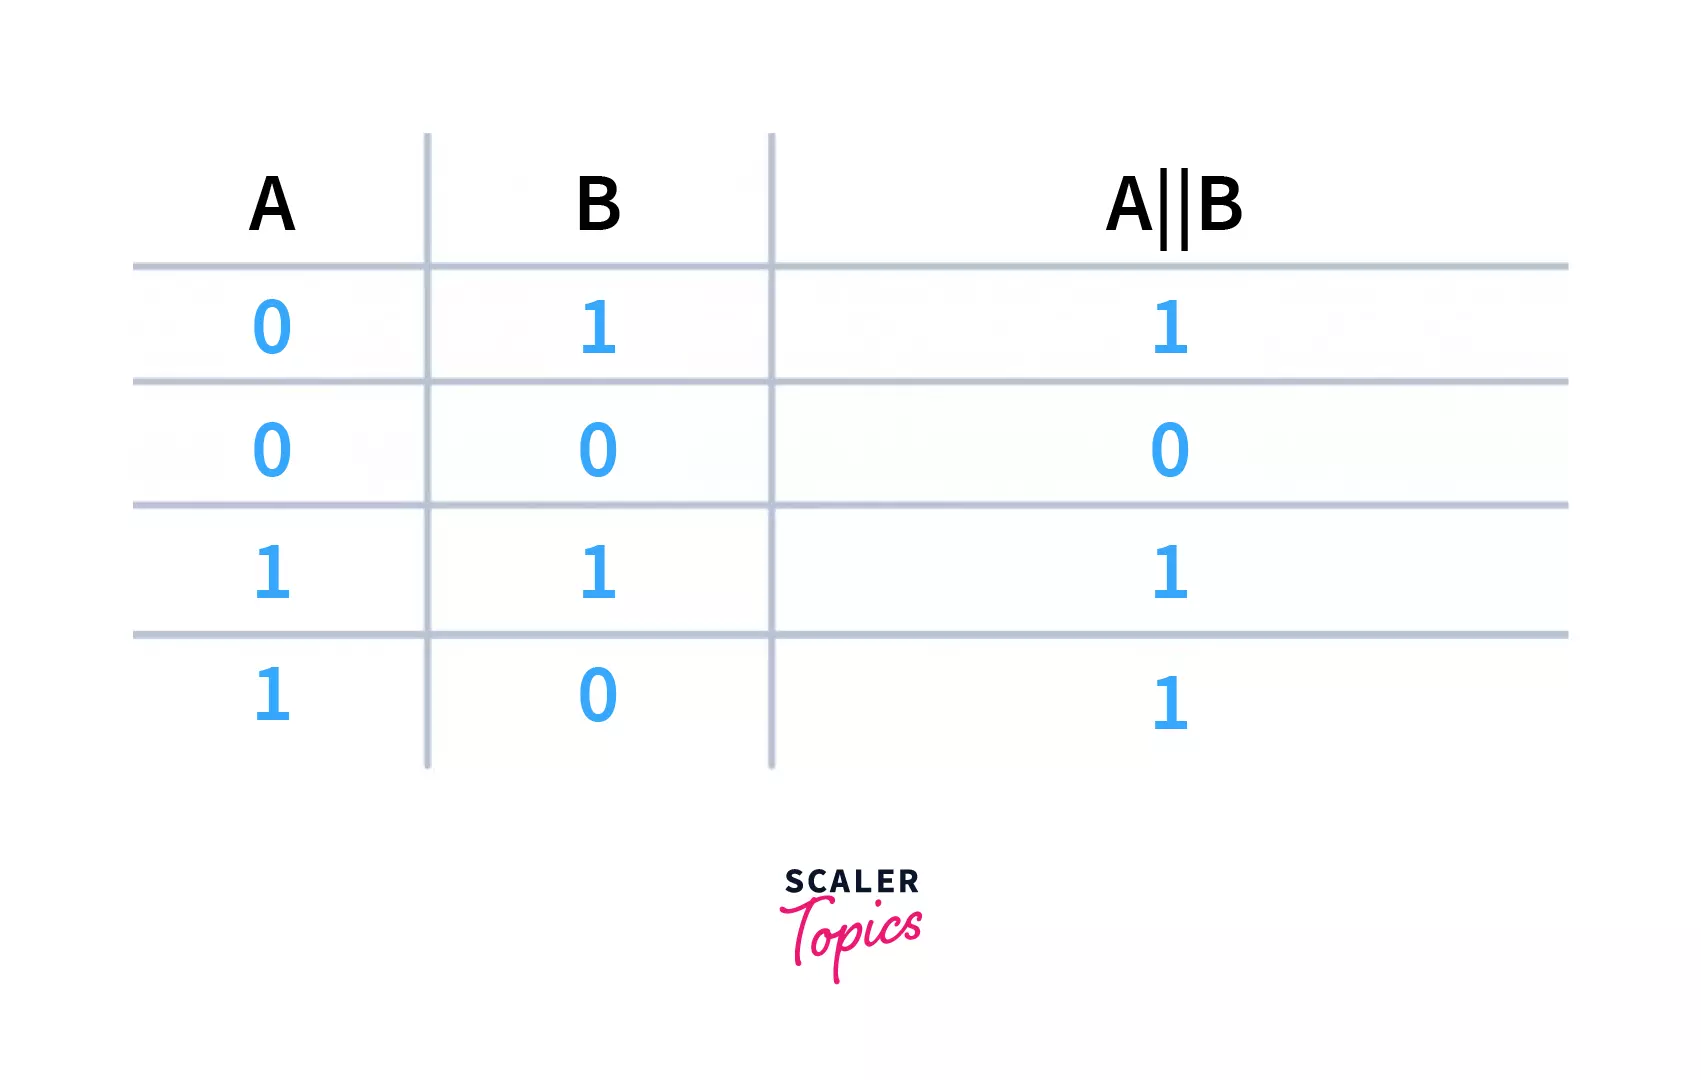 Truth Table for OR Operator